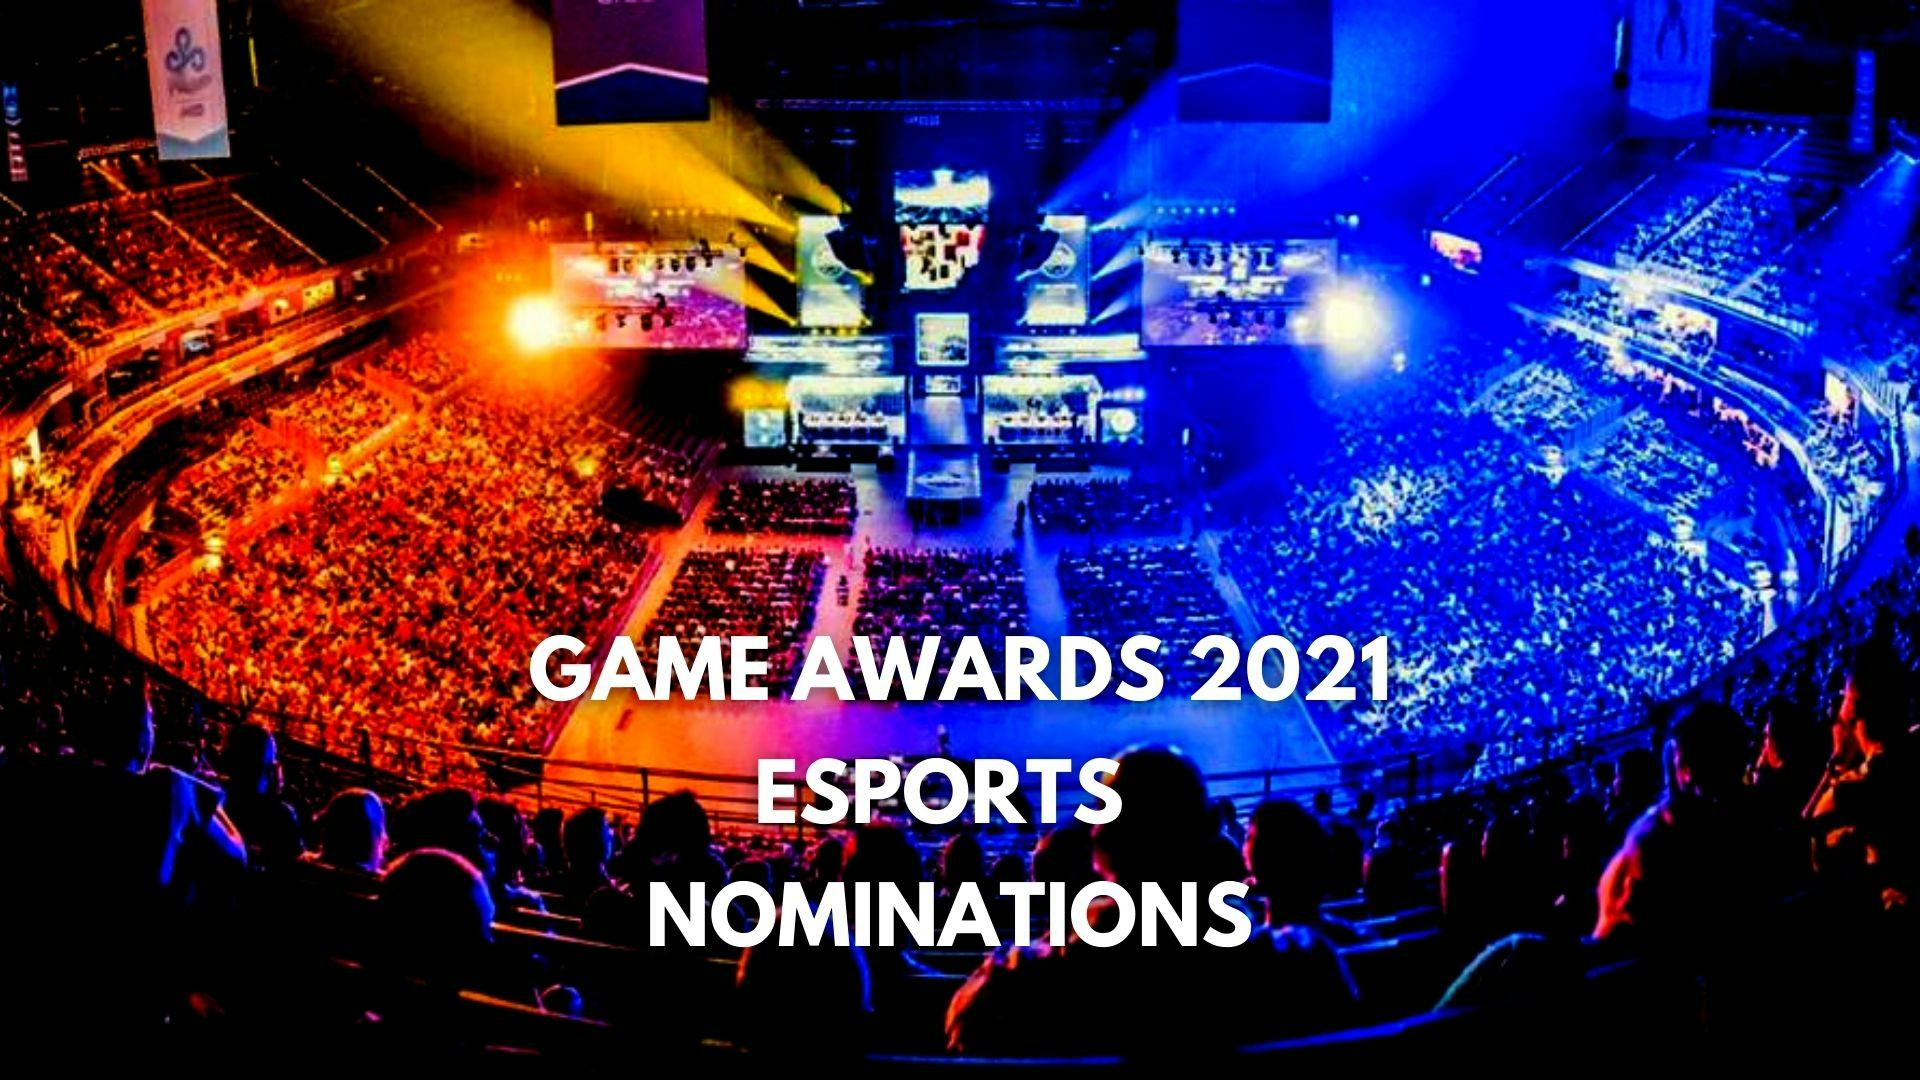 List of all the Game Awards 2021 Nominations in ESPORTS category